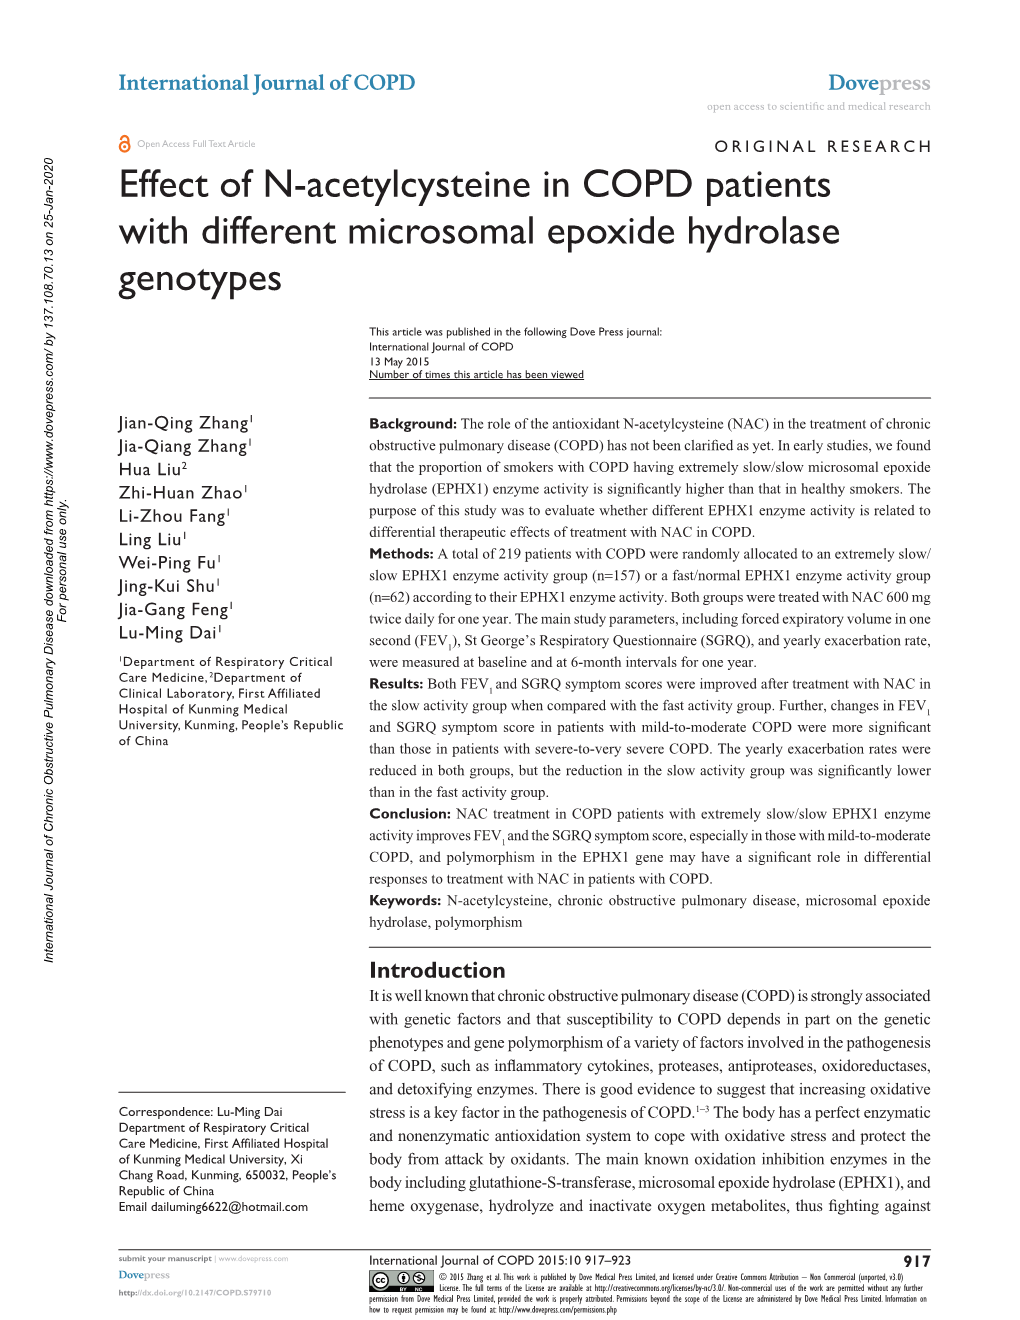 Effect of N-Acetylcysteine in COPD Patients with Different Microsomal Epoxide Hydrolase Genotypes